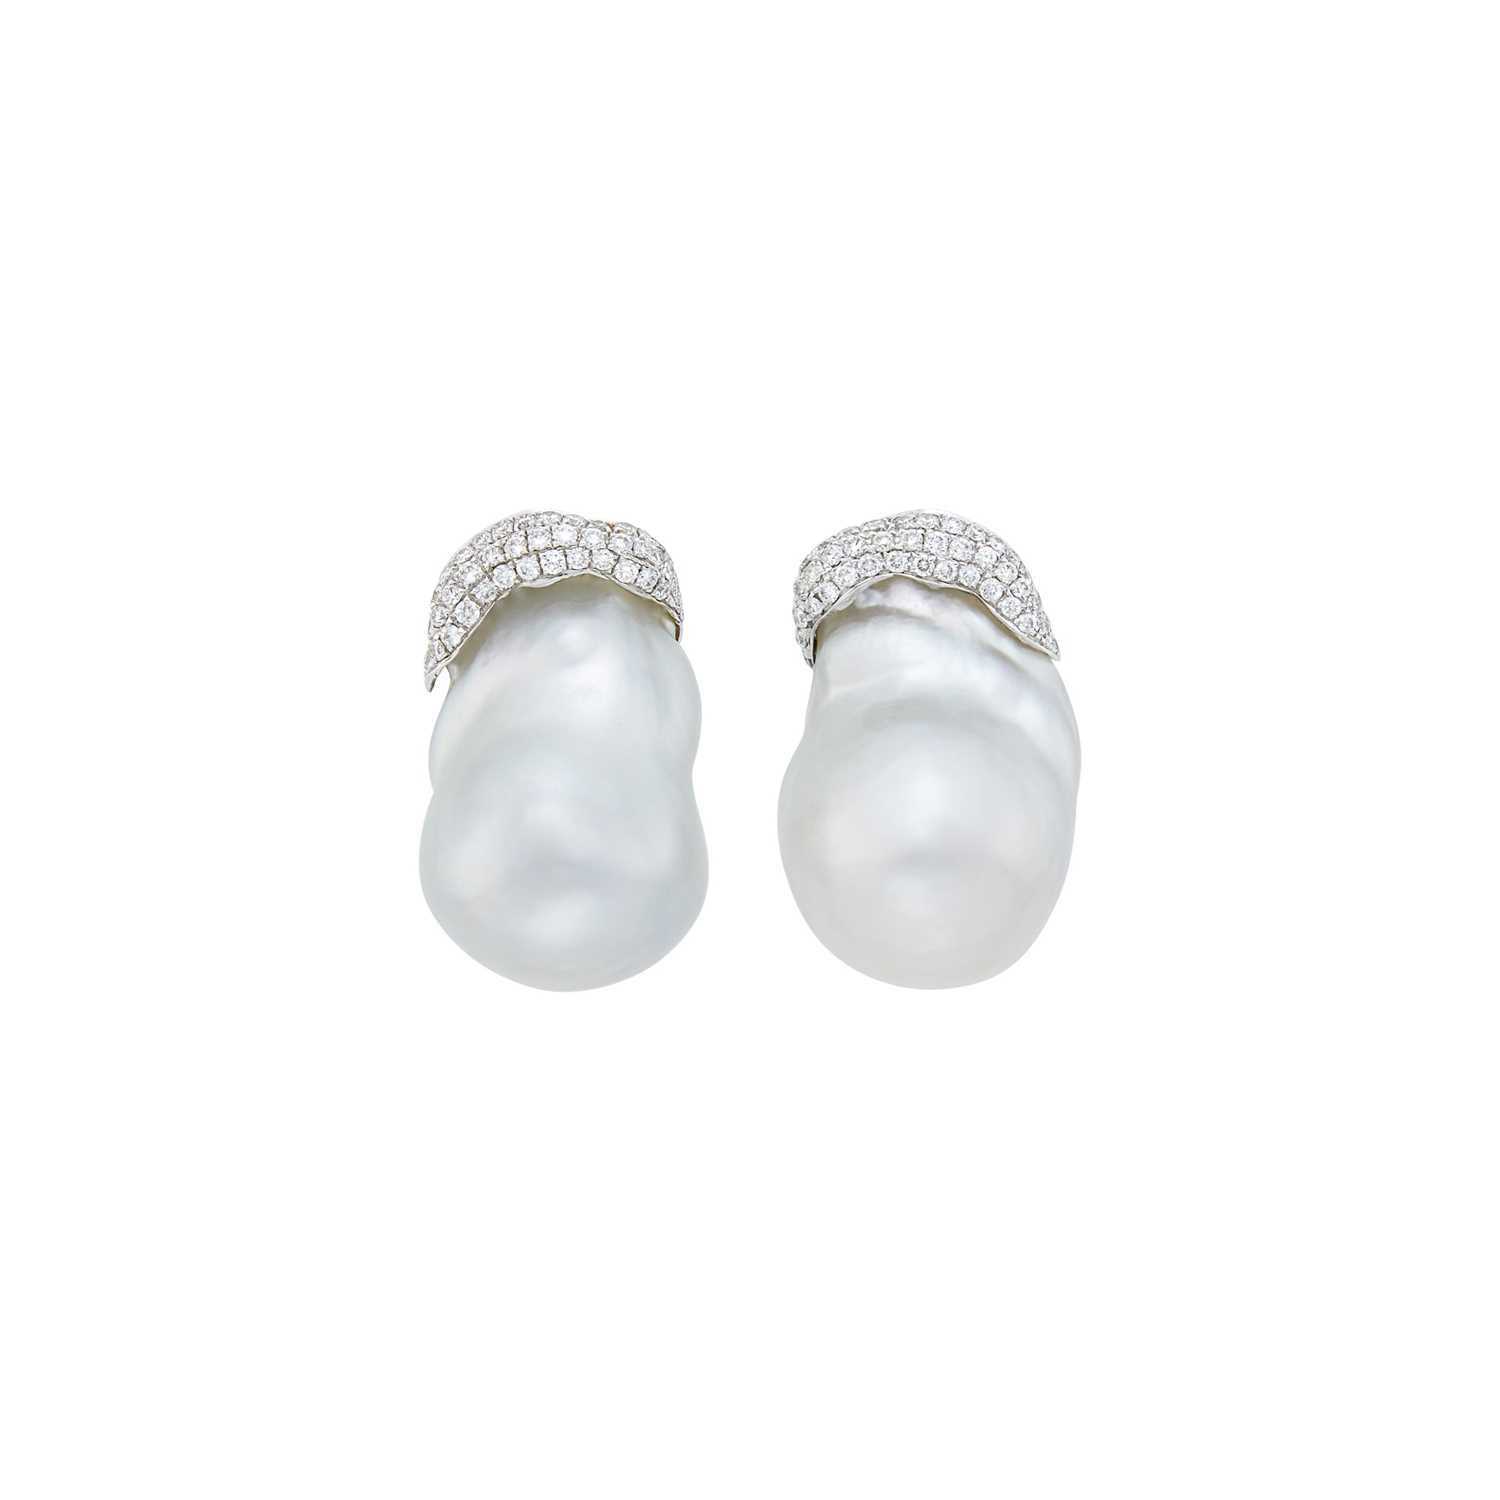 Lot 141 - Pair of White Gold, Baroque Cultured Pearl and Diamond Earclips